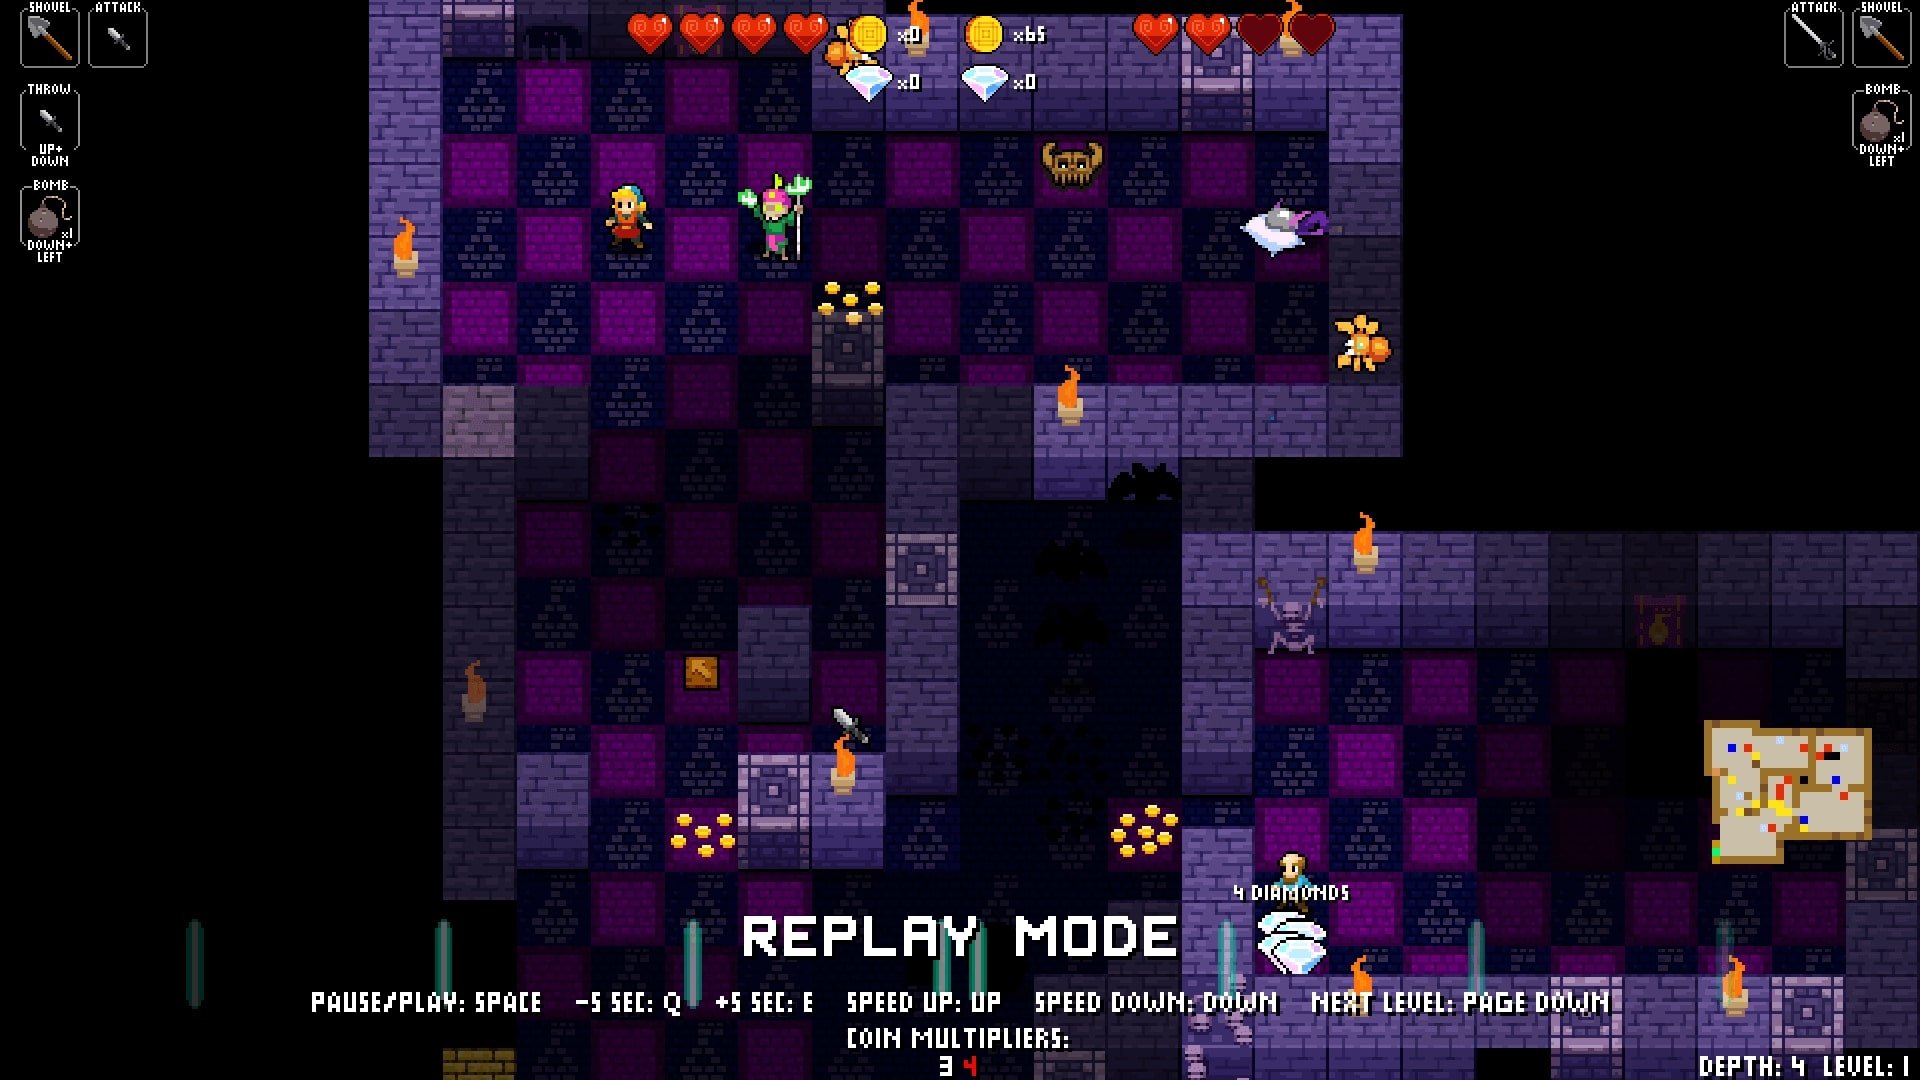 A shot of the new overhauled replay system in Crypt of the NecroDancer